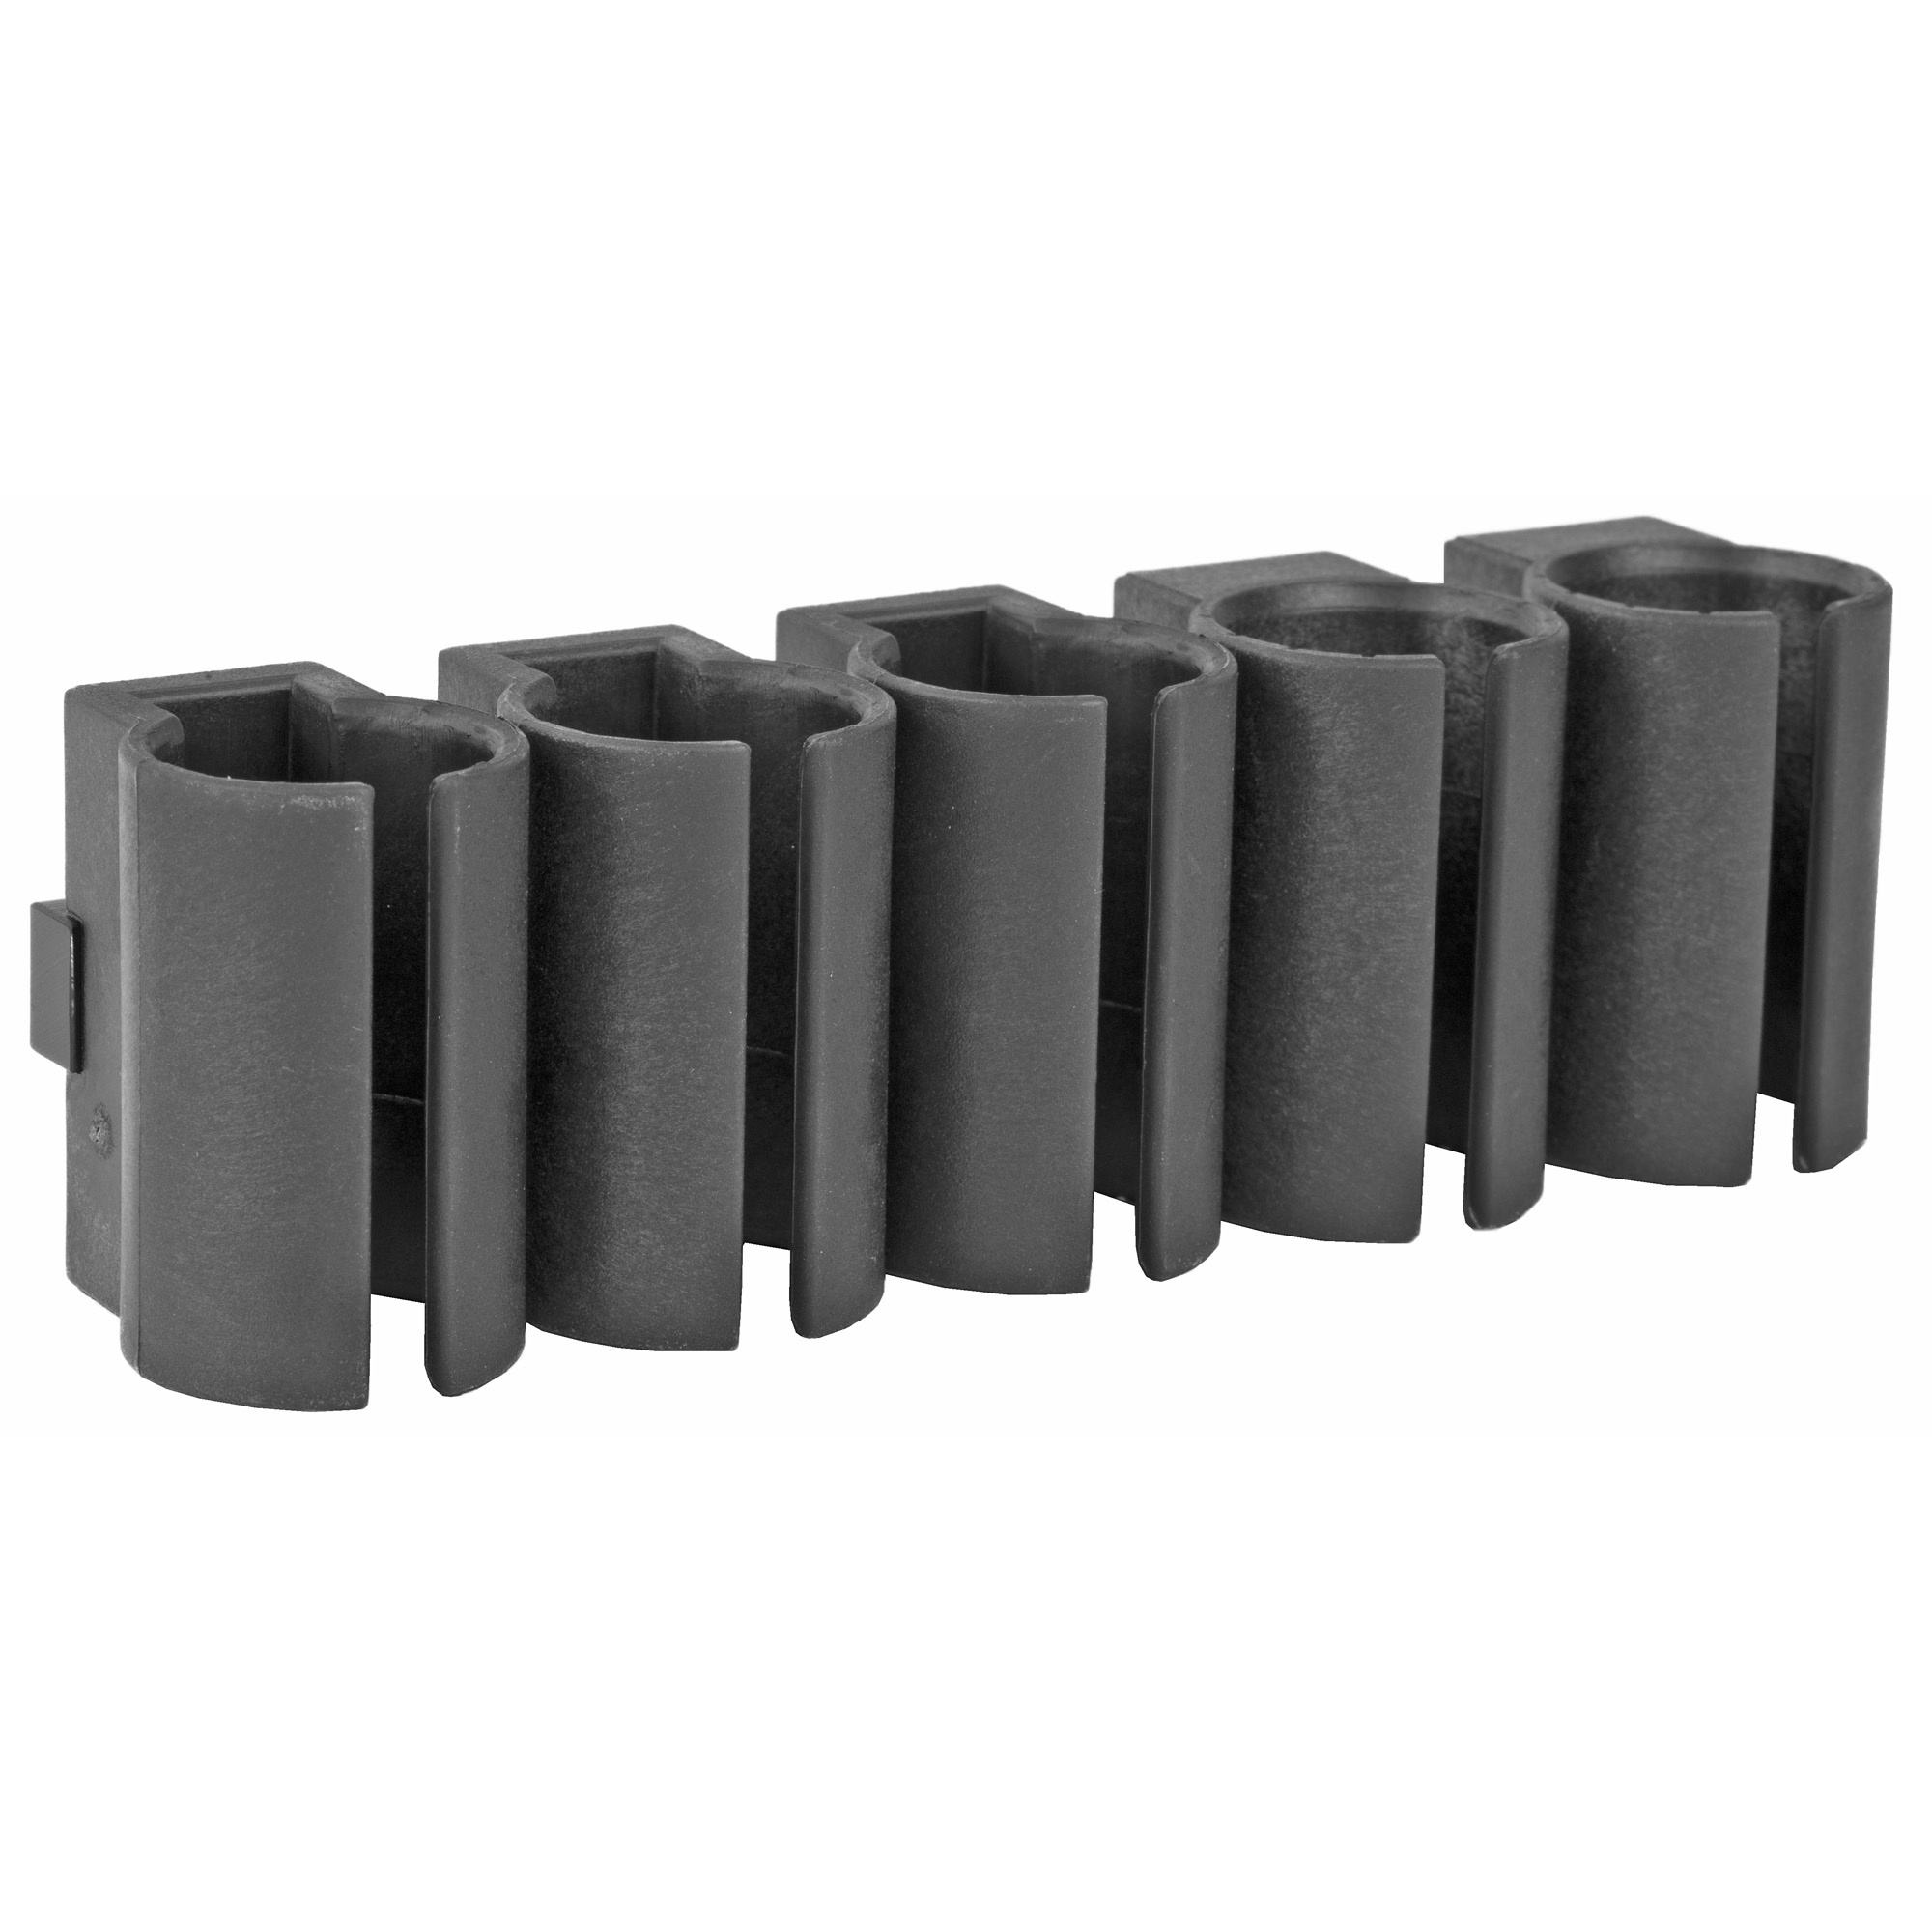 ATI TactLite Stock Shell Carrier Black - 4Shooters